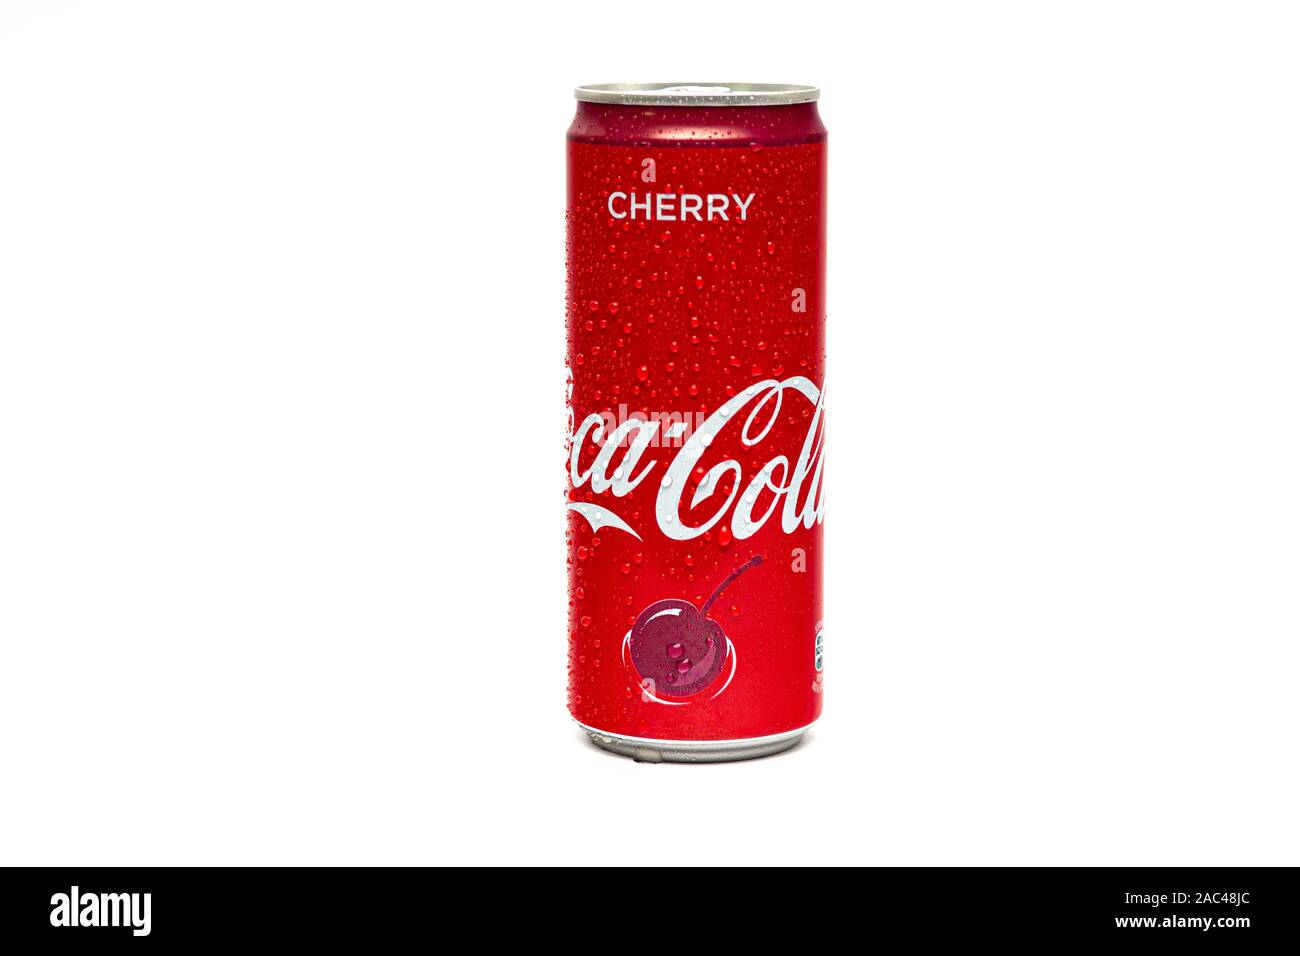 https://c8.alamy.com/comp/2AC48JC/hamm-germany-112019-coca-cola-aluminum-can-with-condensate-isolated-on-white-background-drops-of-condensate-run-down-coca-cola-2AC48JC.jpg